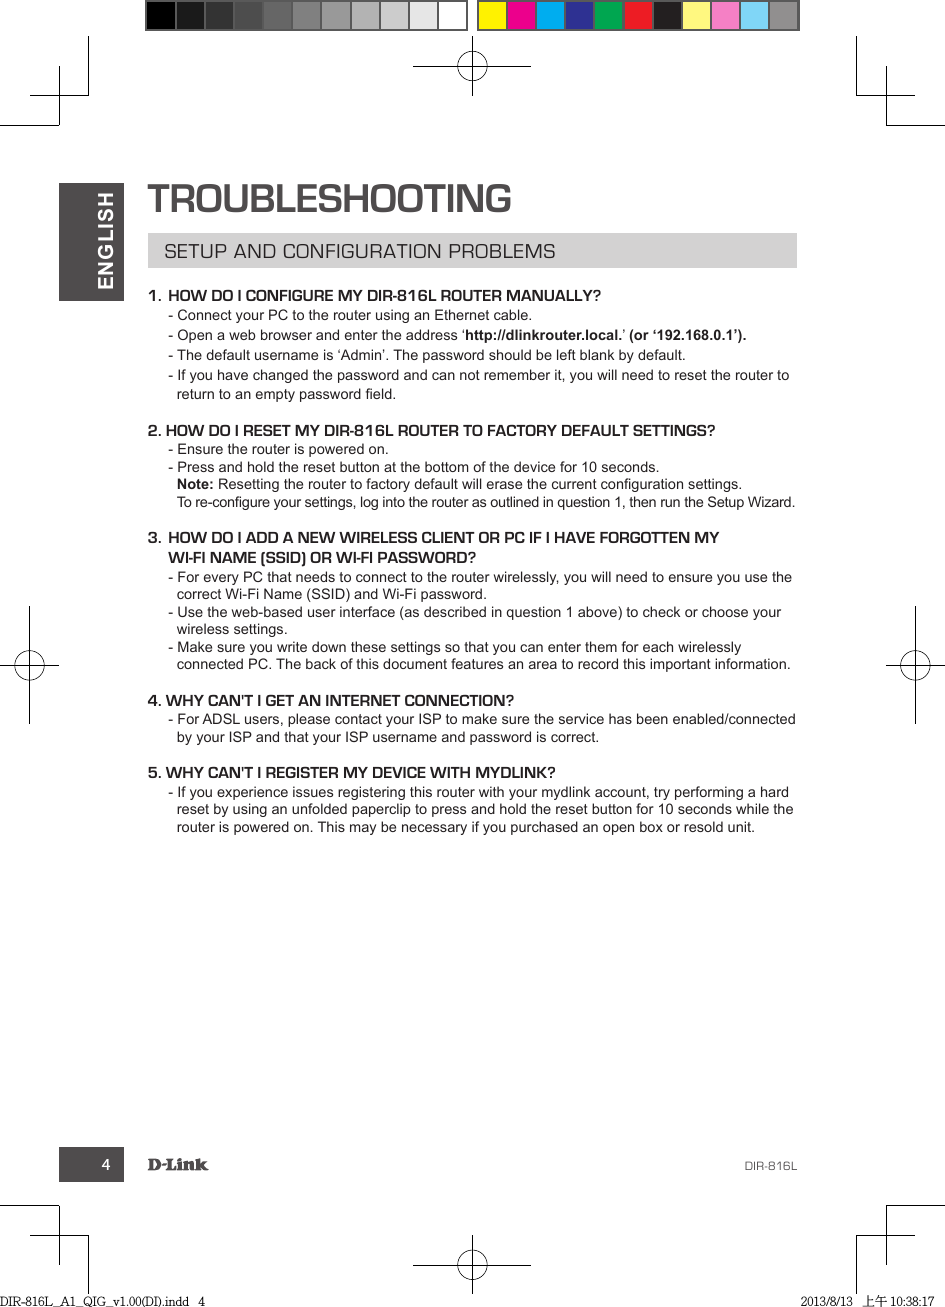 4ENGLISHTROUBLESHOOTING1.  HOW DO I CONFIGURE MY DIR-816L ROUTER MANUALLY?  http://dlinkrouter.local.(or ‘192.168.0.1’).  2. HOW DO I RESET MY DIR-816L ROUTER TO FACTORY DEFAULT SETTINGS?Note:3.  HOW DO I ADD A NEW WIRELESS CLIENT OR PC IF I HAVE FORGOTTEN MY WI-FI NAME (SSID) OR WI-FI PASSWORD?4. WHY CAN&apos;T I GET AN INTERNET CONNECTION?5. WHY CAN&apos;T I REGISTER MY DEVICE WITH MYDLINK?DIR-816L_A1_QIG_v1.00(DI).indd   4 2013/8/13   上午 10:38:17